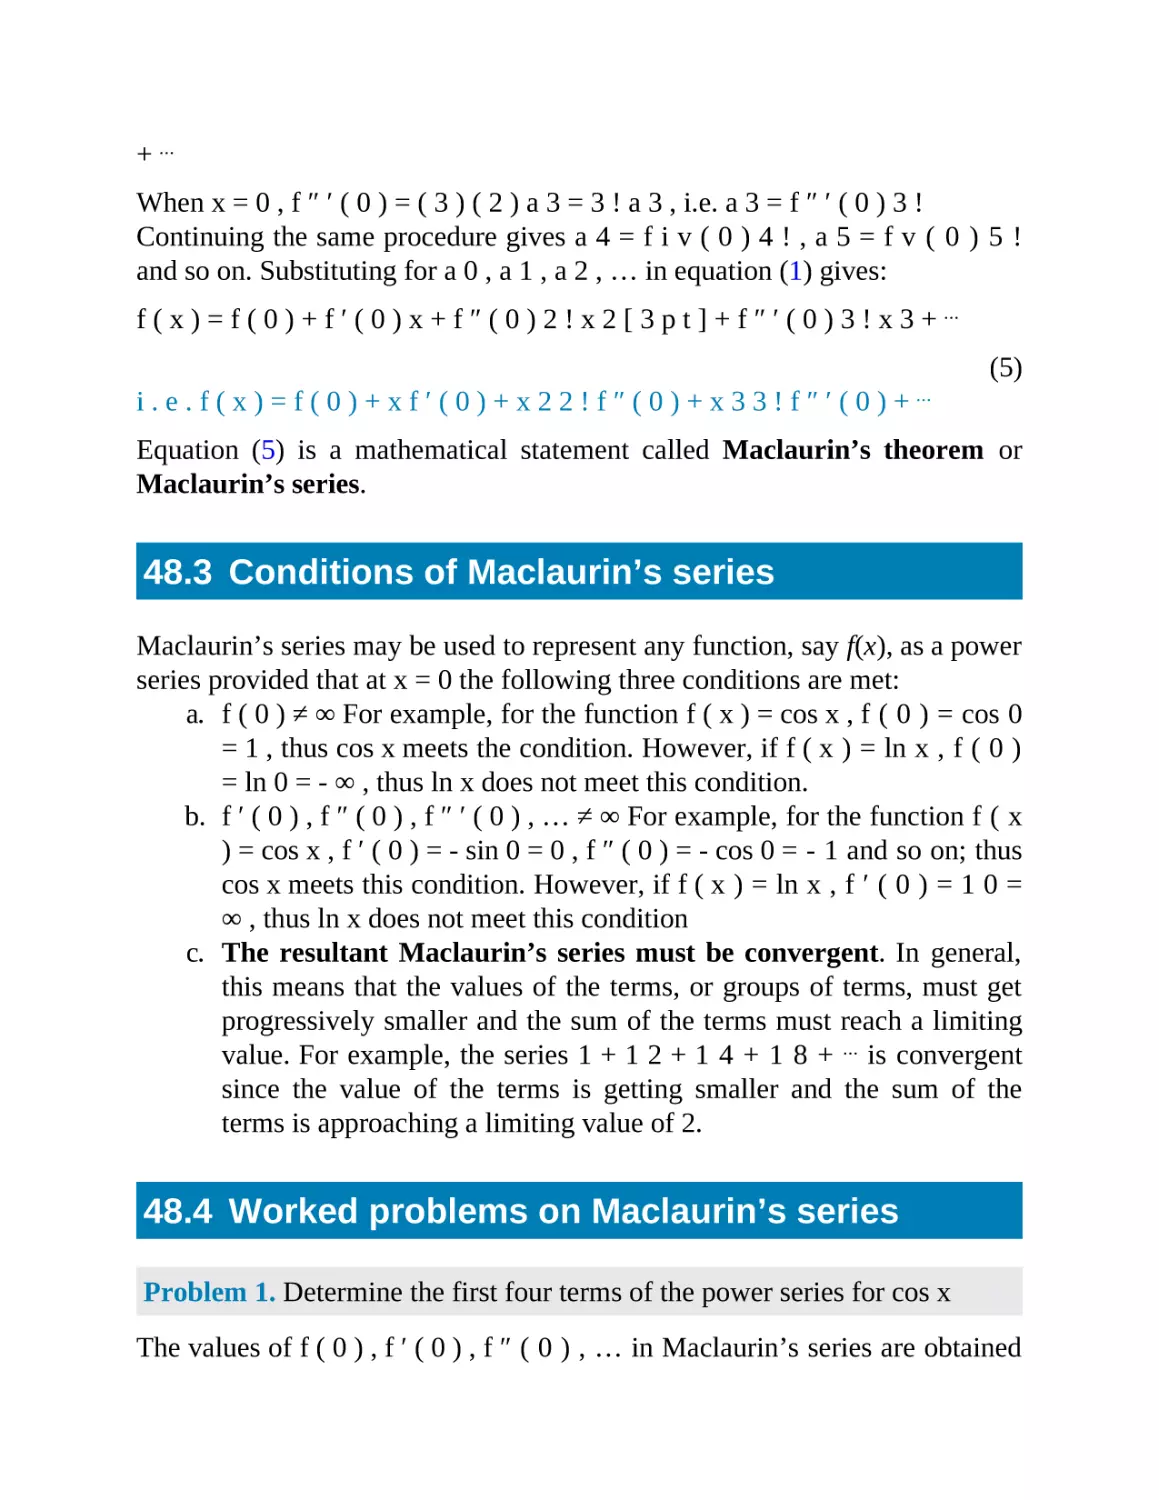 48.3 Conditions of Maclaurin’s series
48.4 Worked problems on Maclaurin’s series